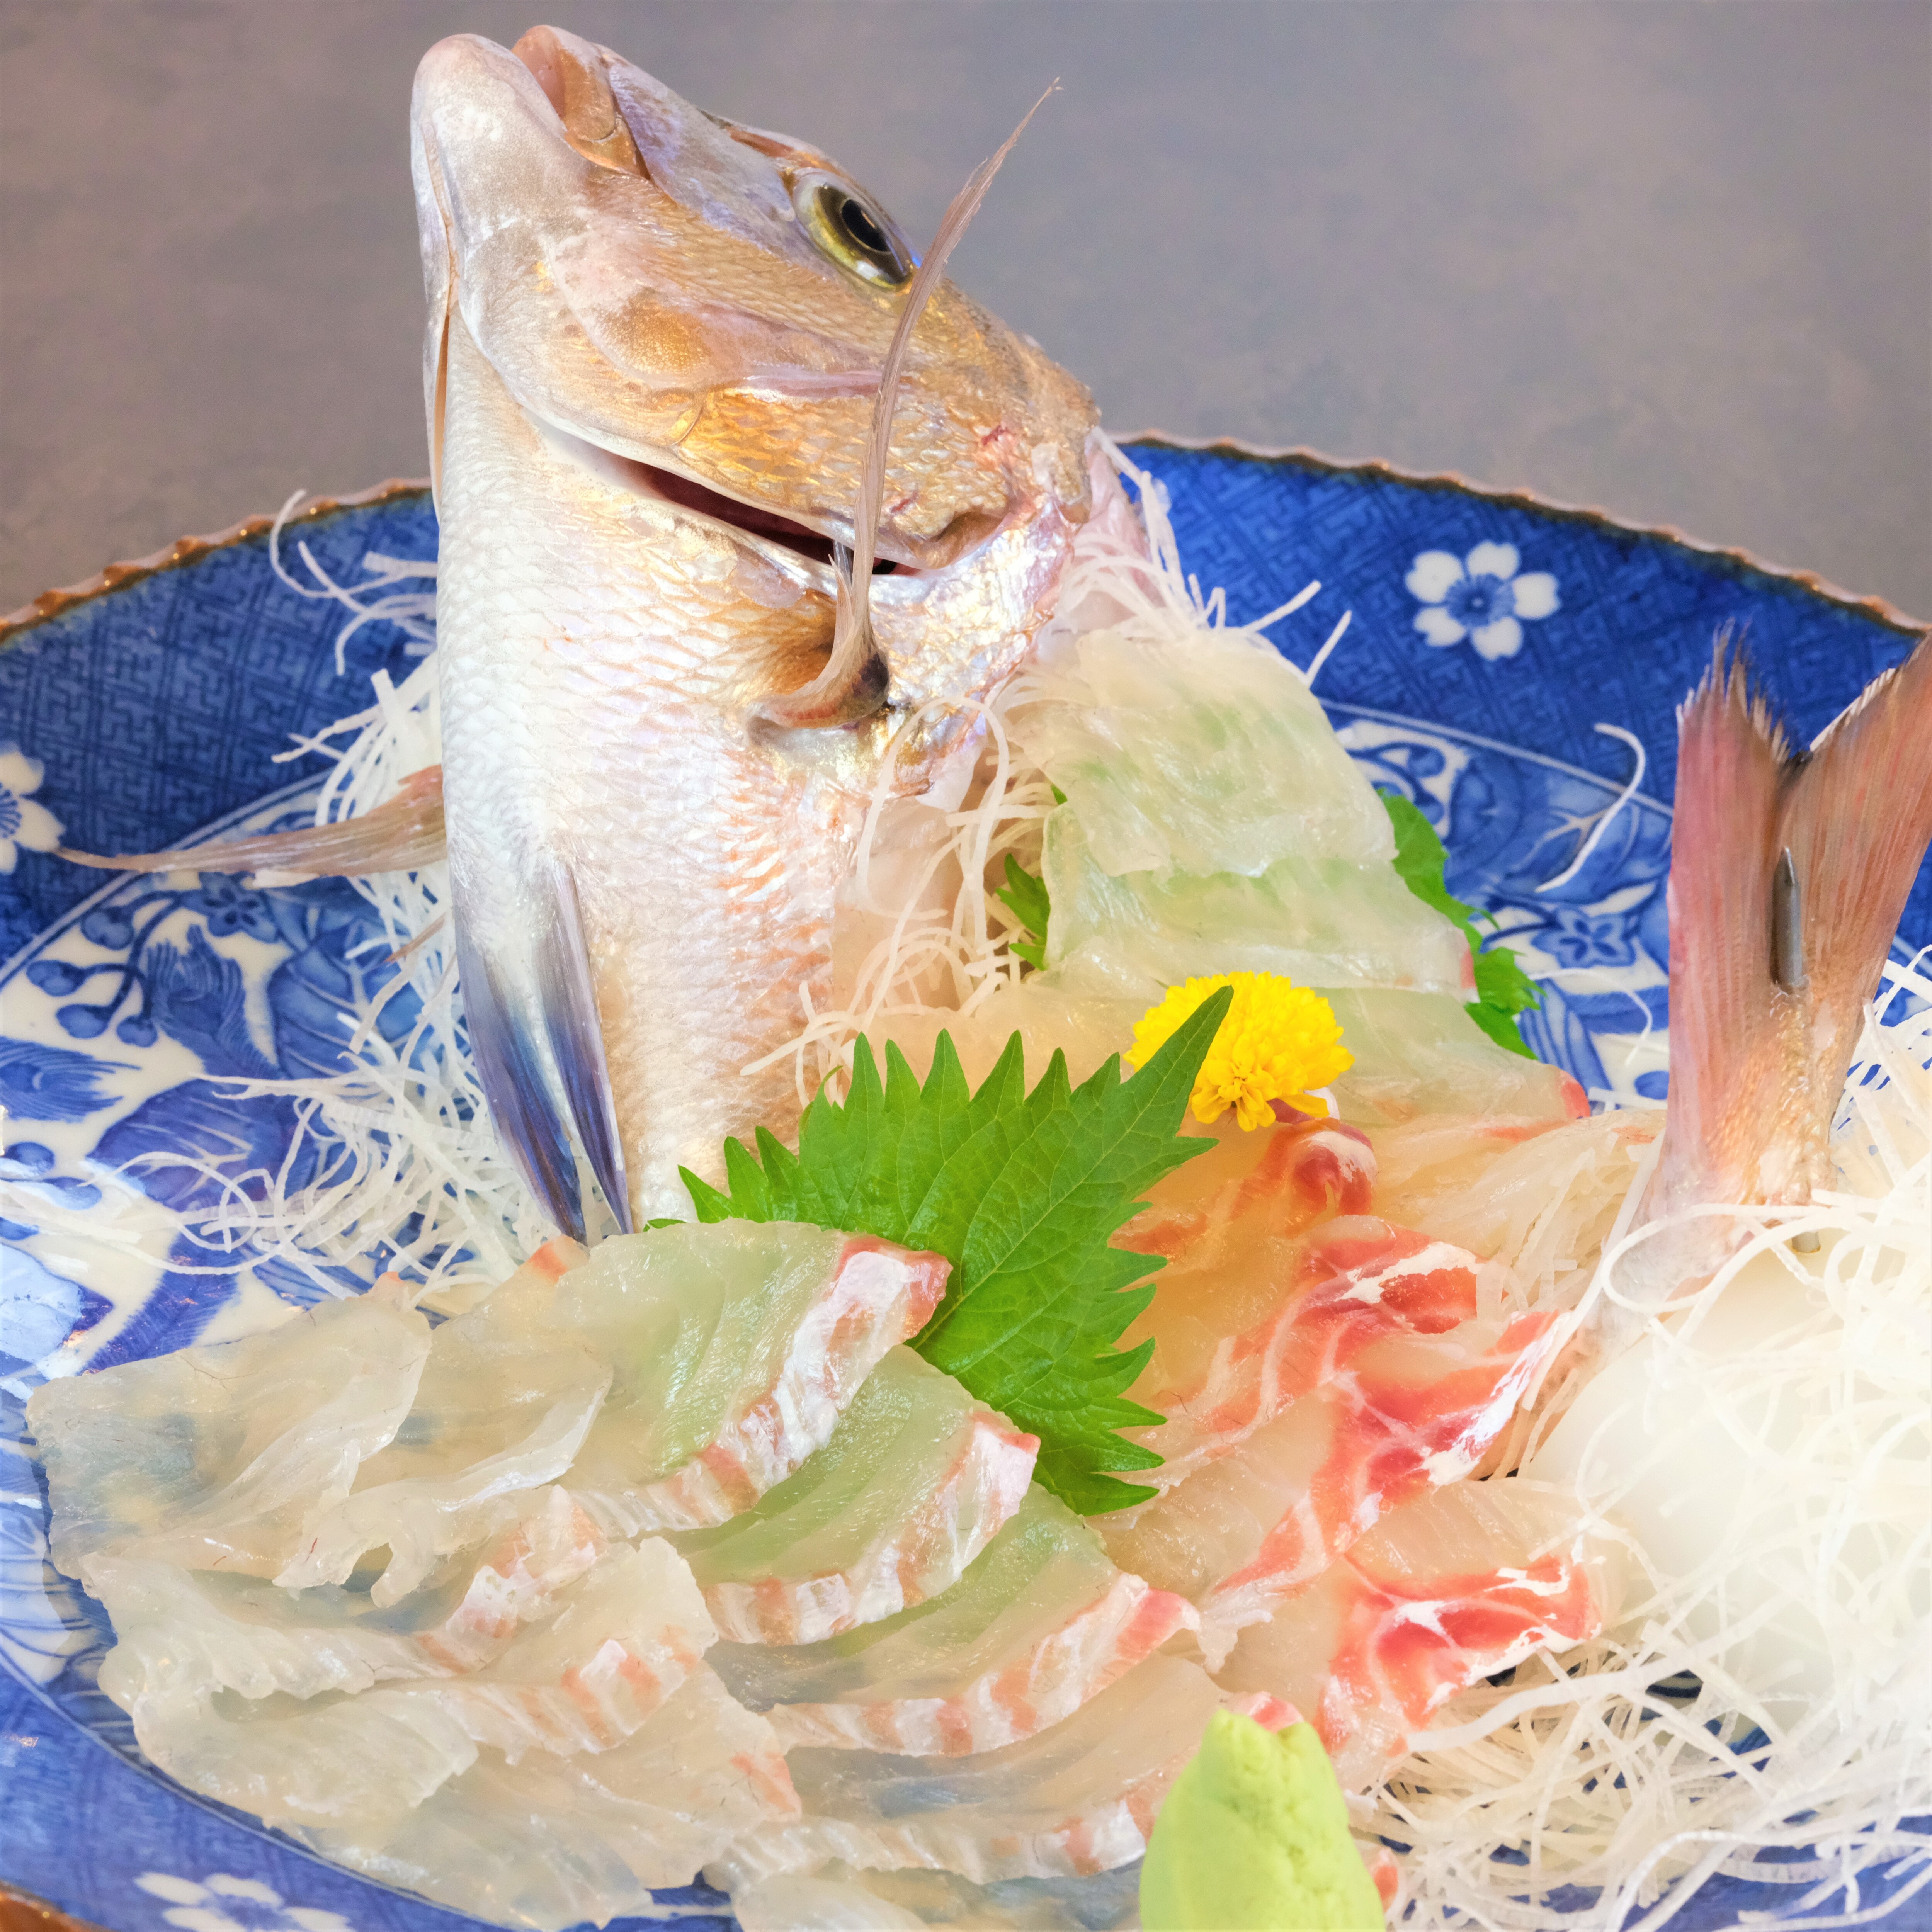 It is a red sea bream sashimi that we carefully raised.